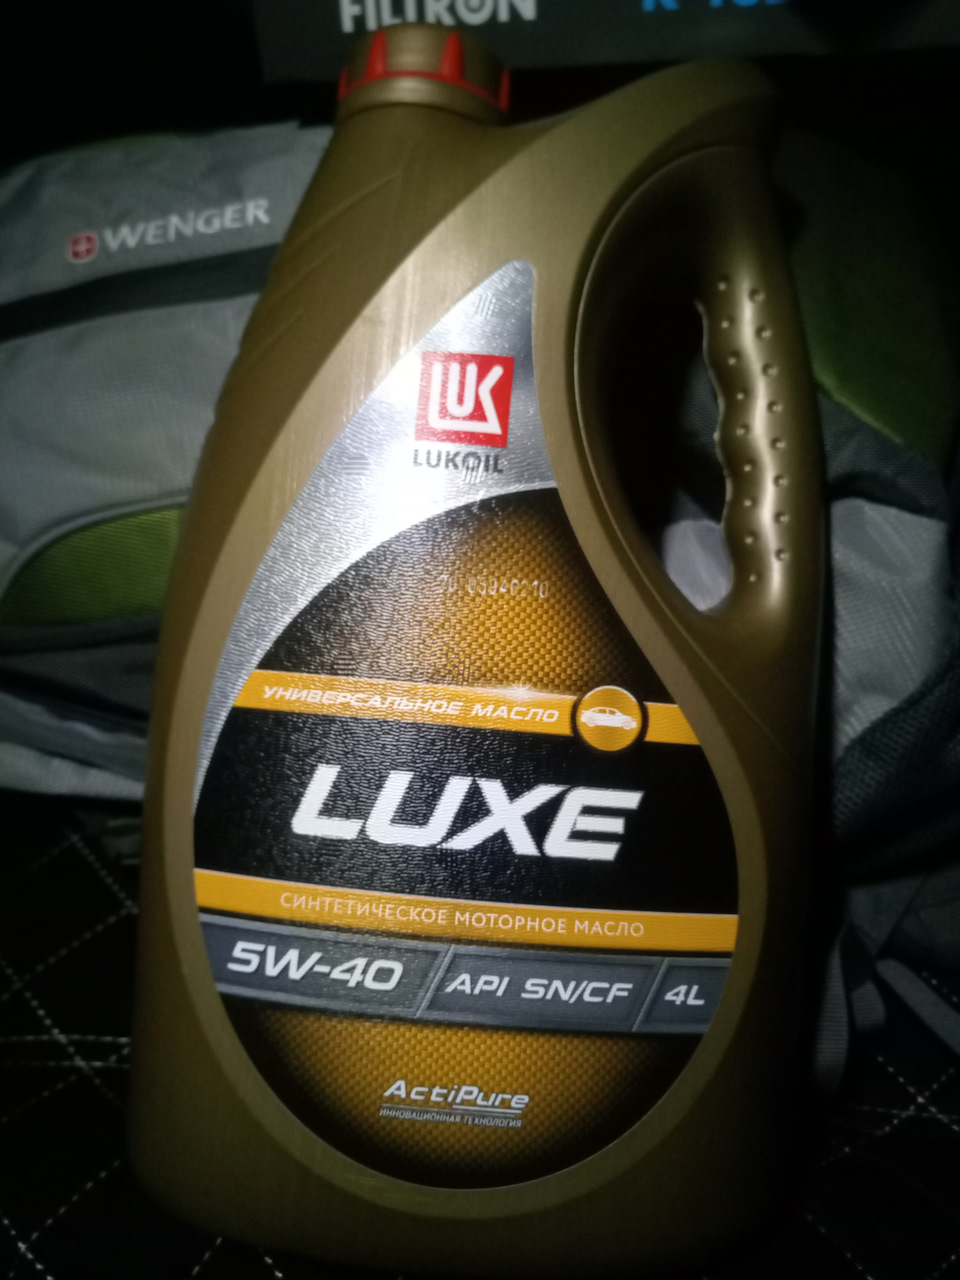 Масла лукойл люкс 5 40. Лукойл Luxe 5w-40 синтетика. Масло Лукойл SN CF 5w40. Lukoil Luxe Synthetic 5w-40, API SN/CF. Лукойл Люкс 5w40 синтетика.